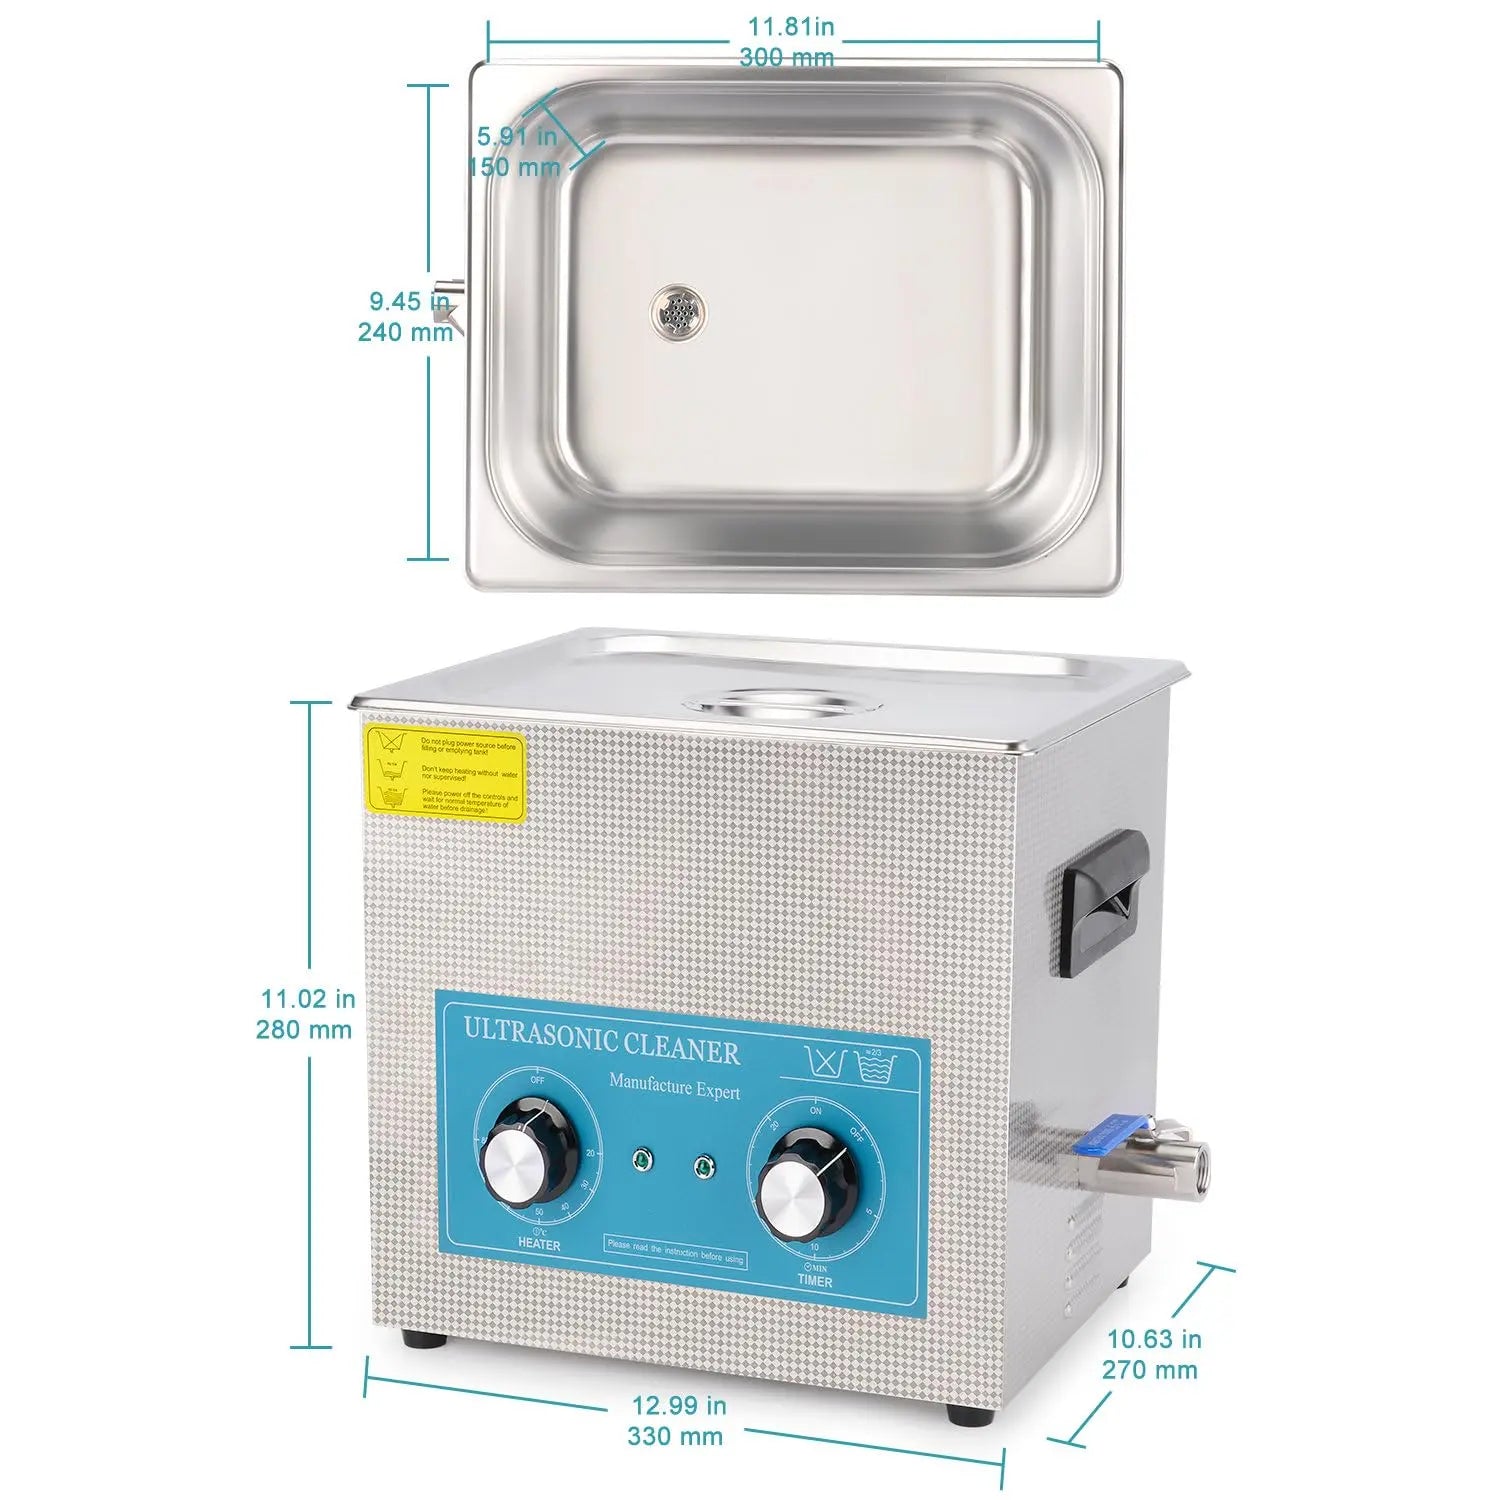 Ultrasonic Cleaner with Mechanic Control Panel of Heating and Timer Ultrasonic Cleaners